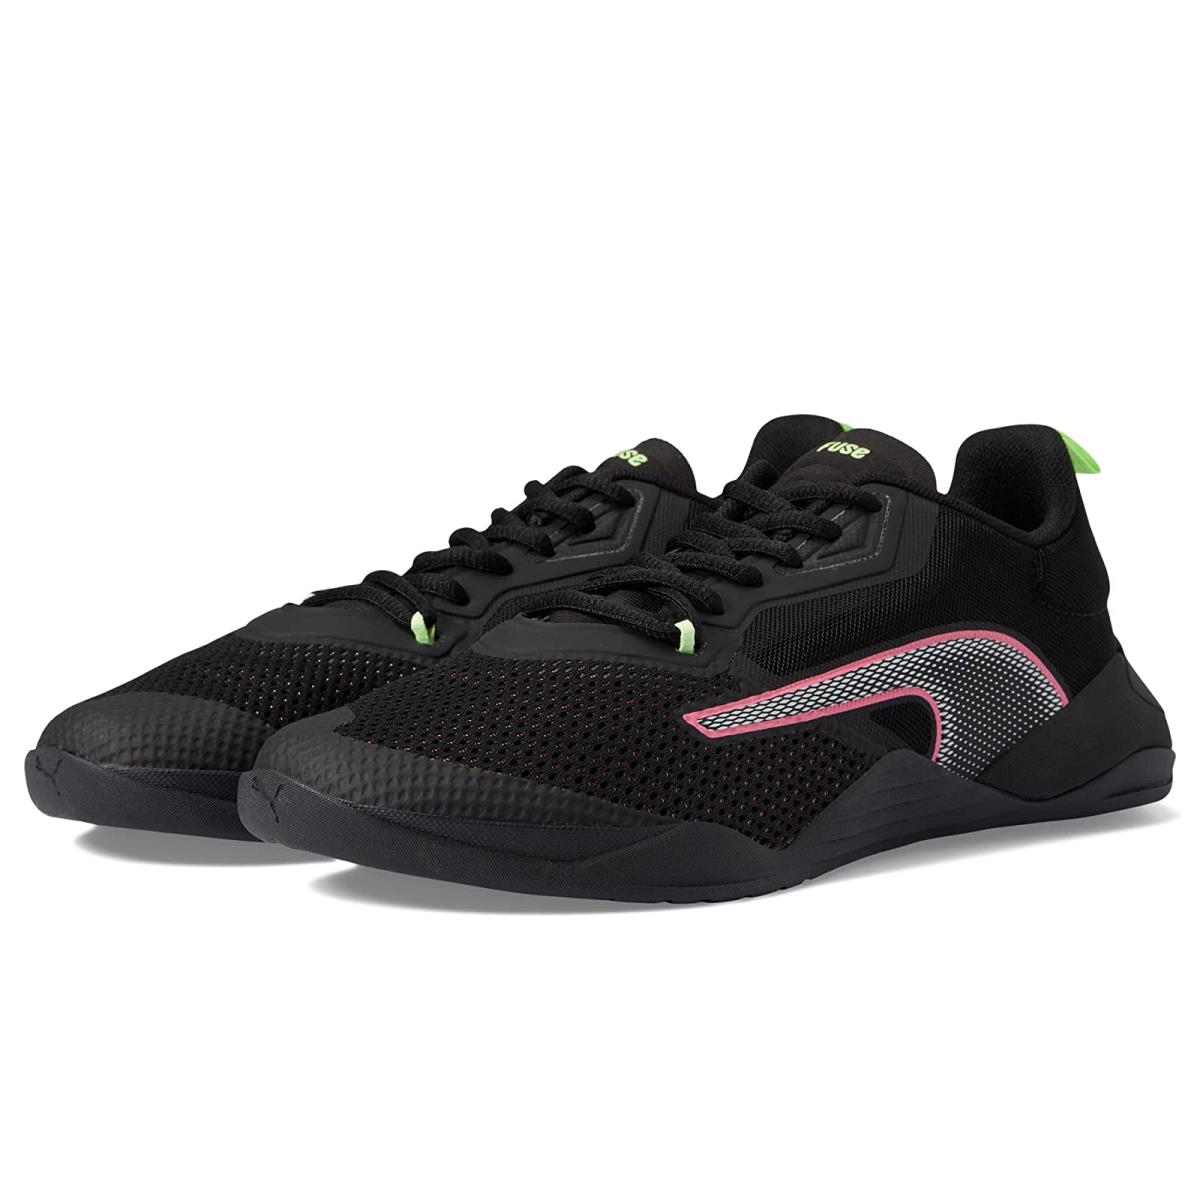 Woman`s Sneakers Athletic Shoes Puma Fuse 2.0 Puma Black/Sunset Pink